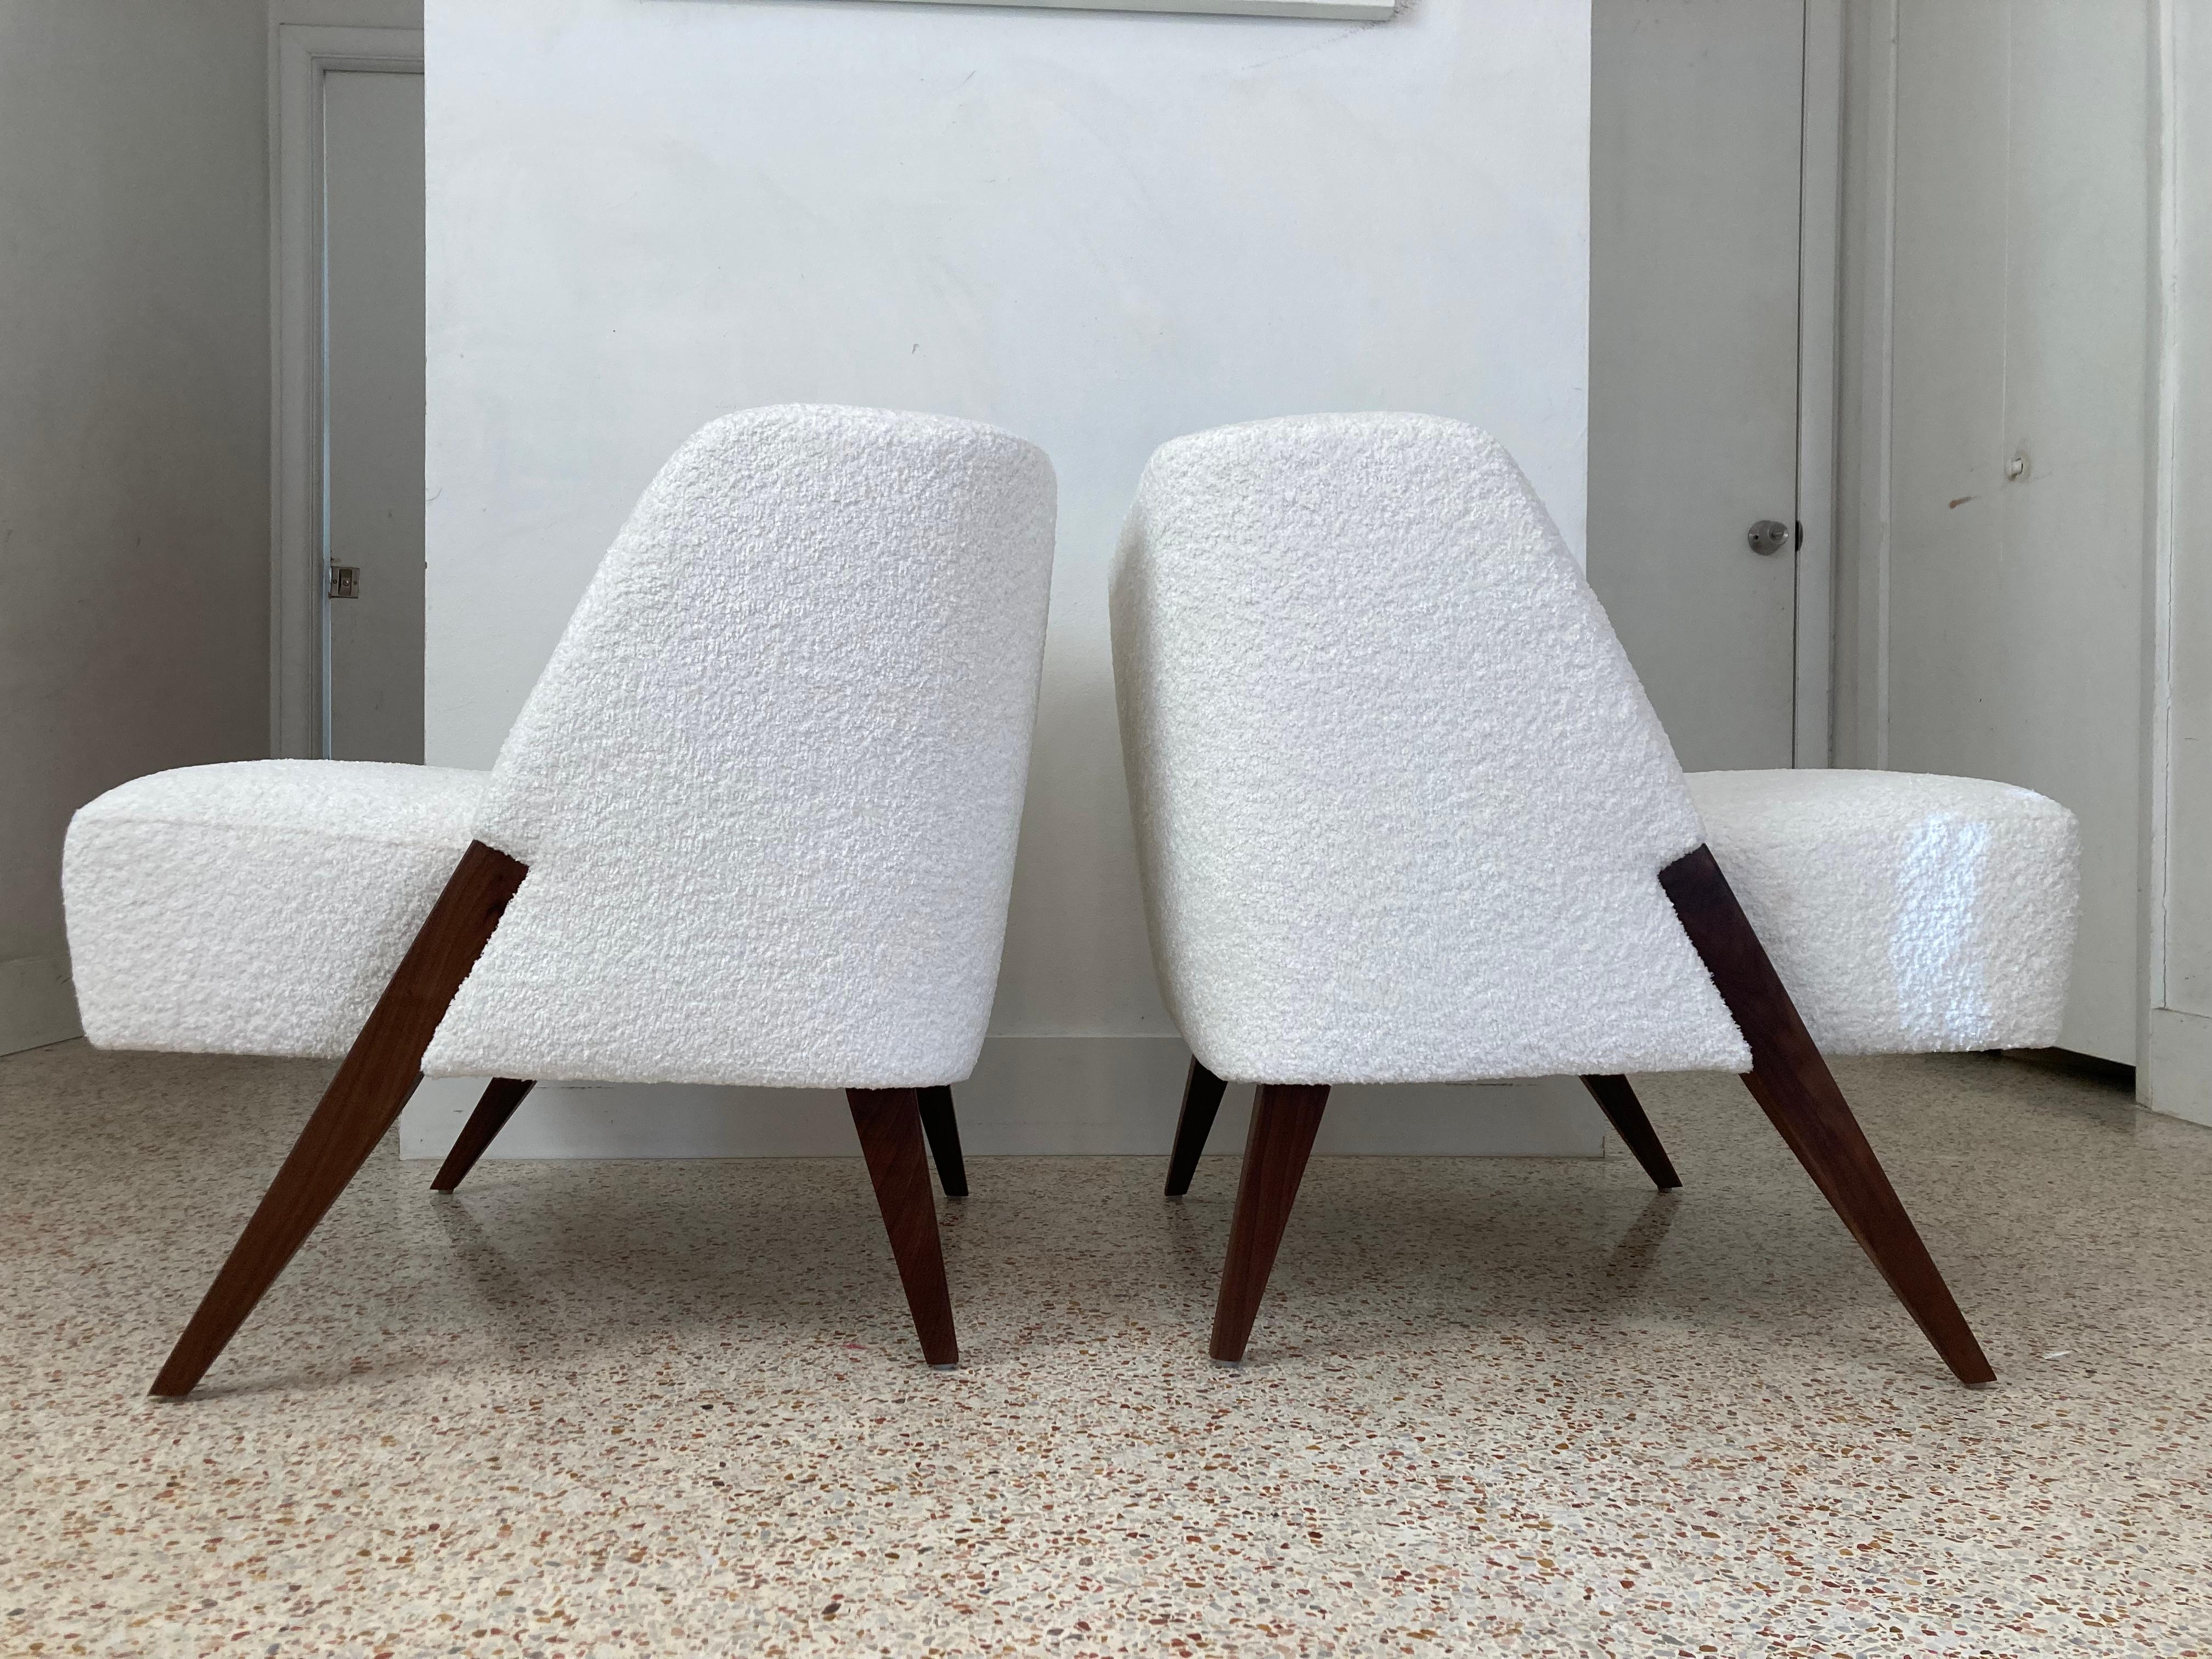 Incredible pair of lounge chairs in the style of Gio Ponti. Solid walnut legs and ivory bouclé fabric. Please see picture thirteen for color reference, where we are comparing a white piece of paper to the fabric.
Ready for a new home.